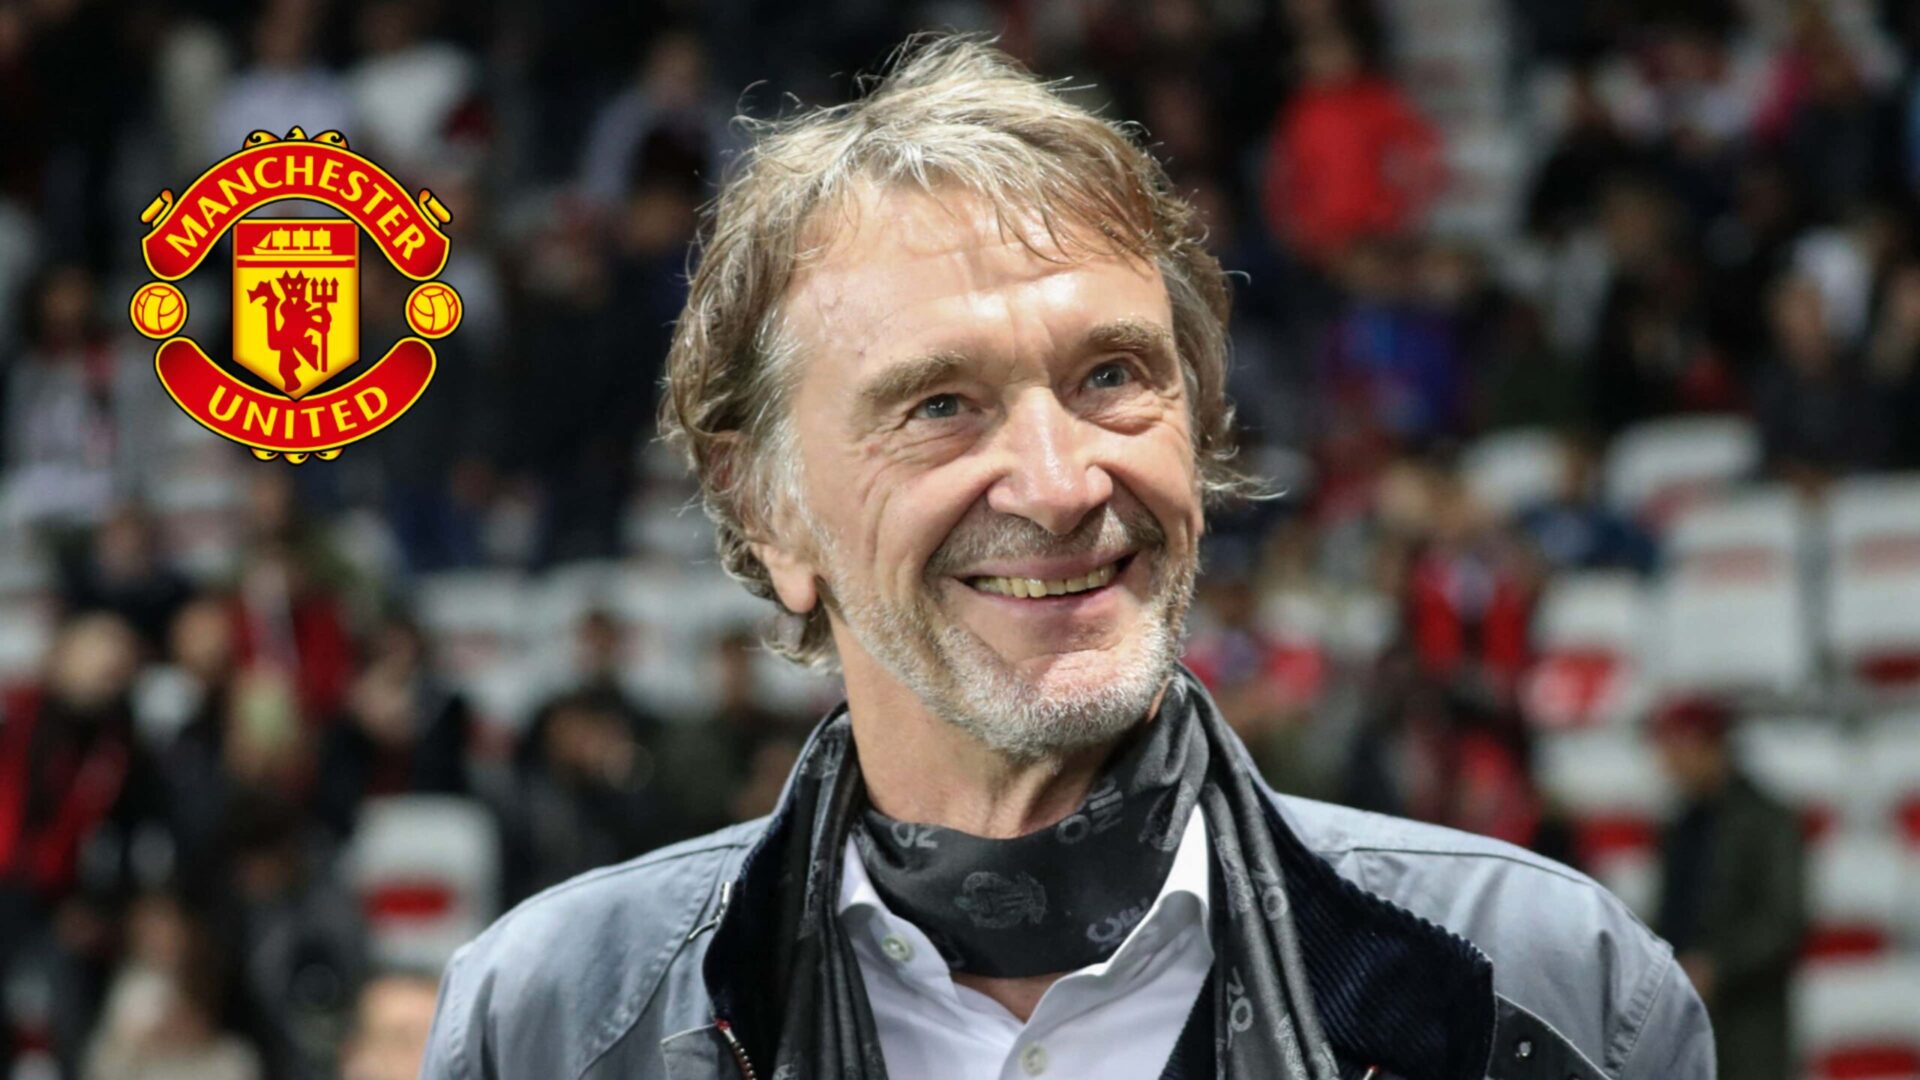 Man United: FA & Premier League approve Sir Jim Ratcliffe's acquisition of 25% stake